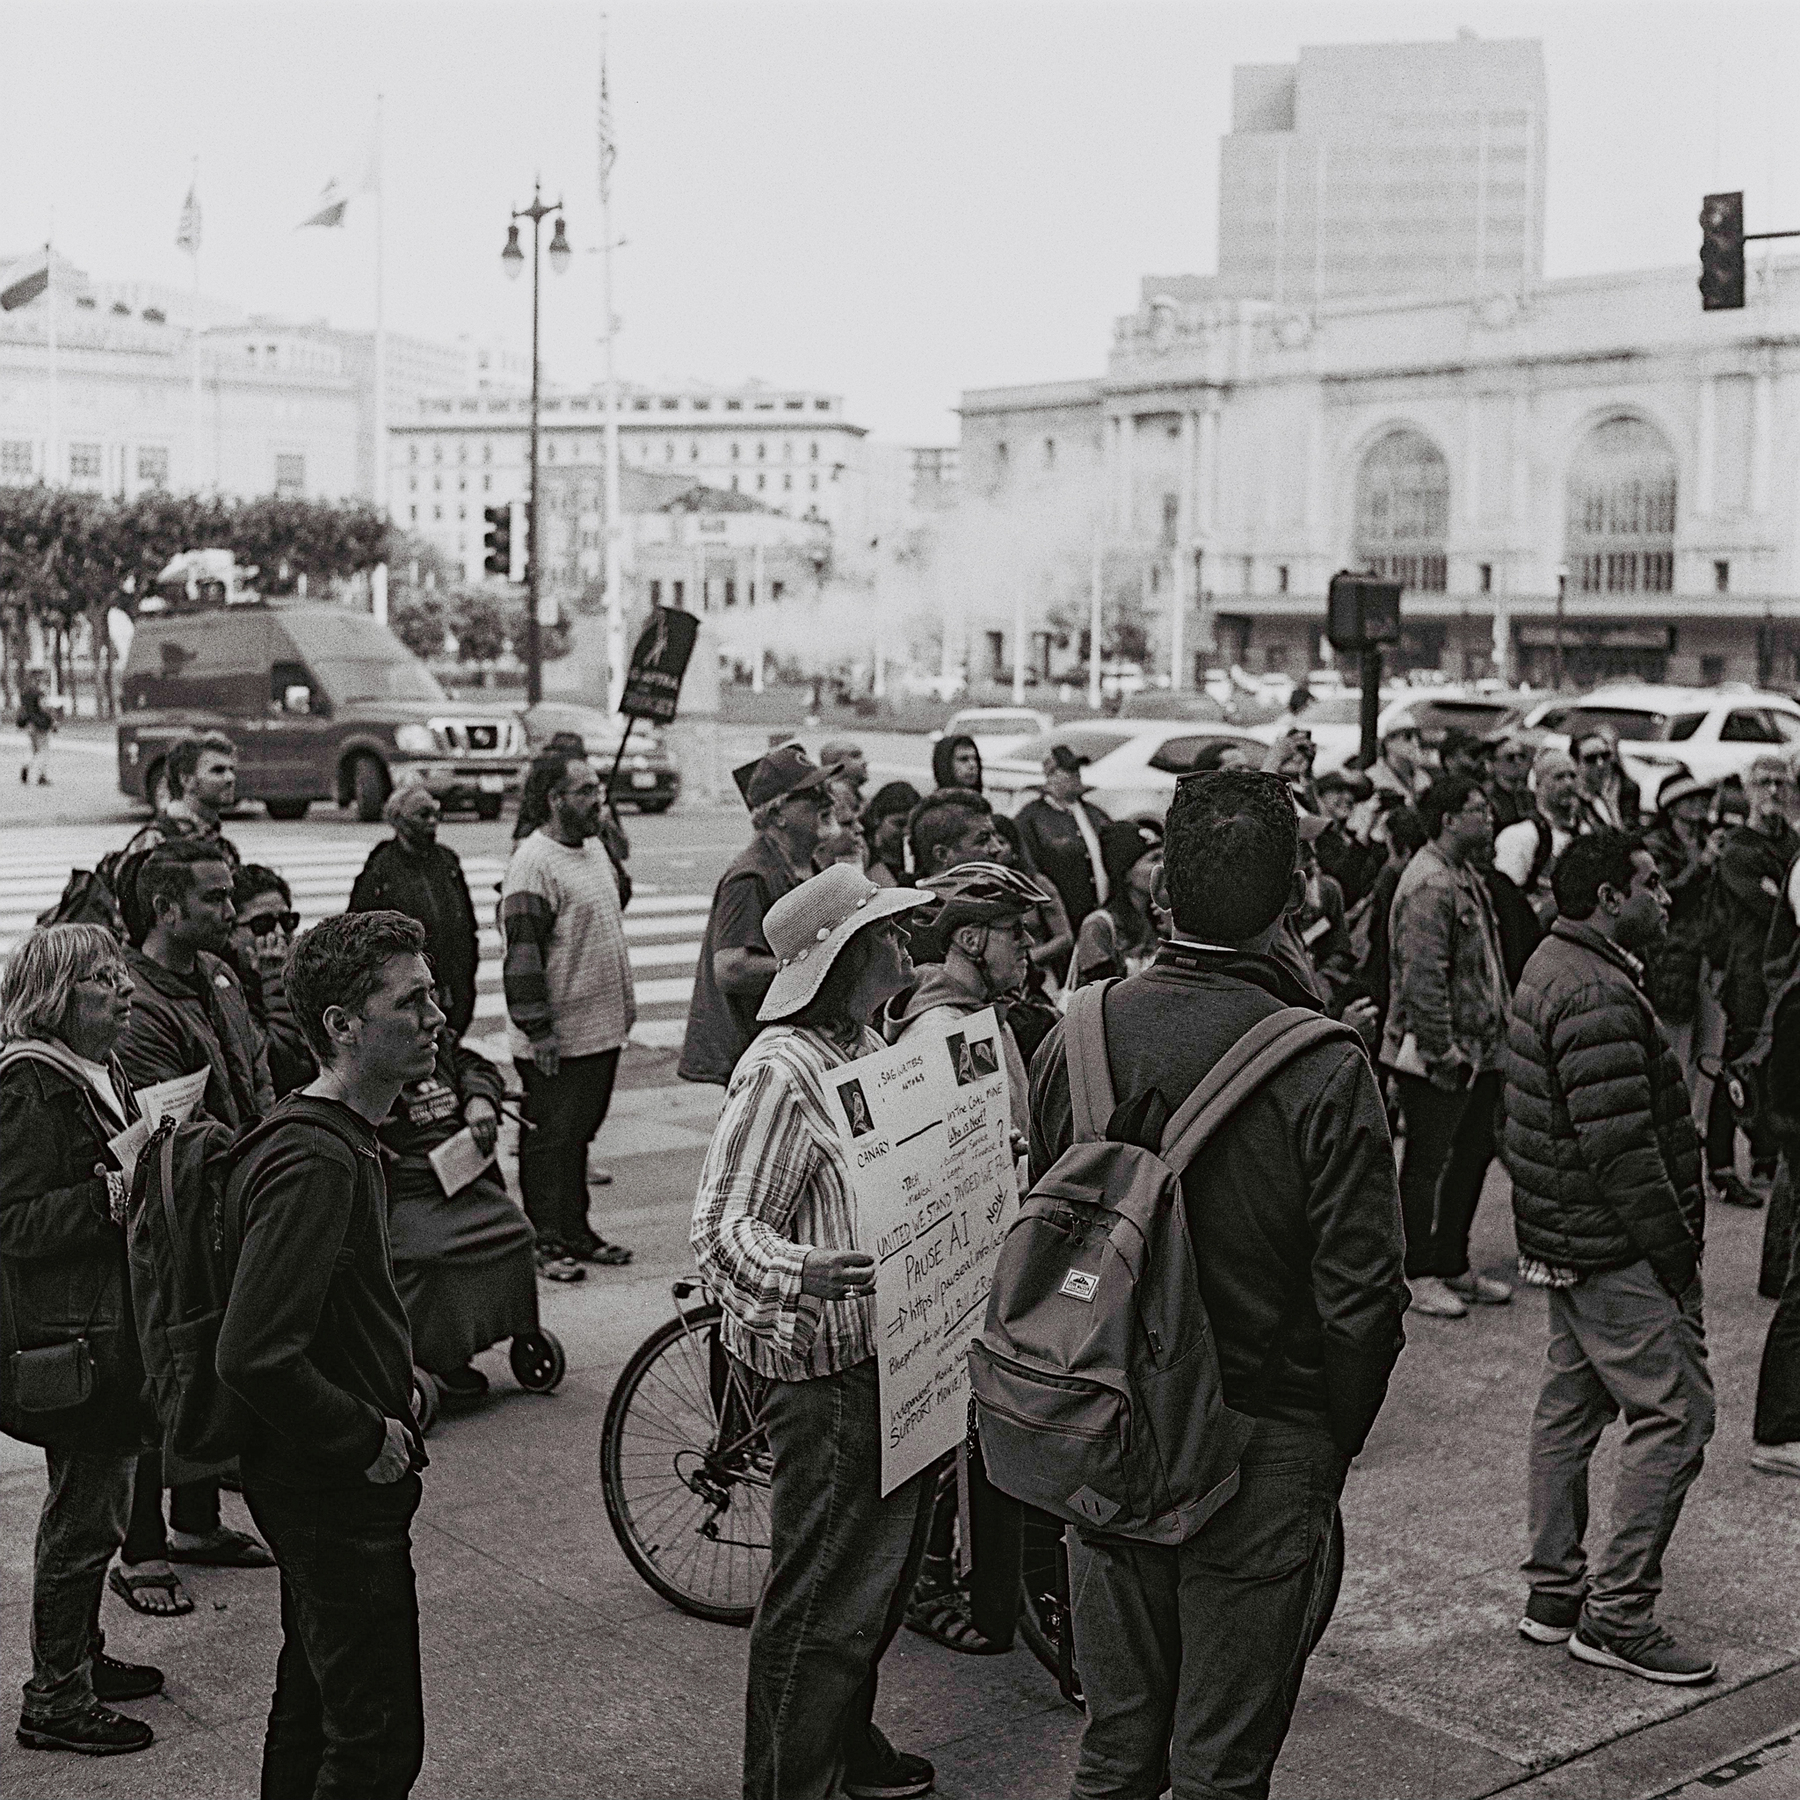 a scan of a black and white photo showing a gathering of people outside SF City Hall holding signs supporting the strike. In the background, half the photo has a scene of the field and Bill Graham auditorium building and a steam geyser with steam coming out of the road